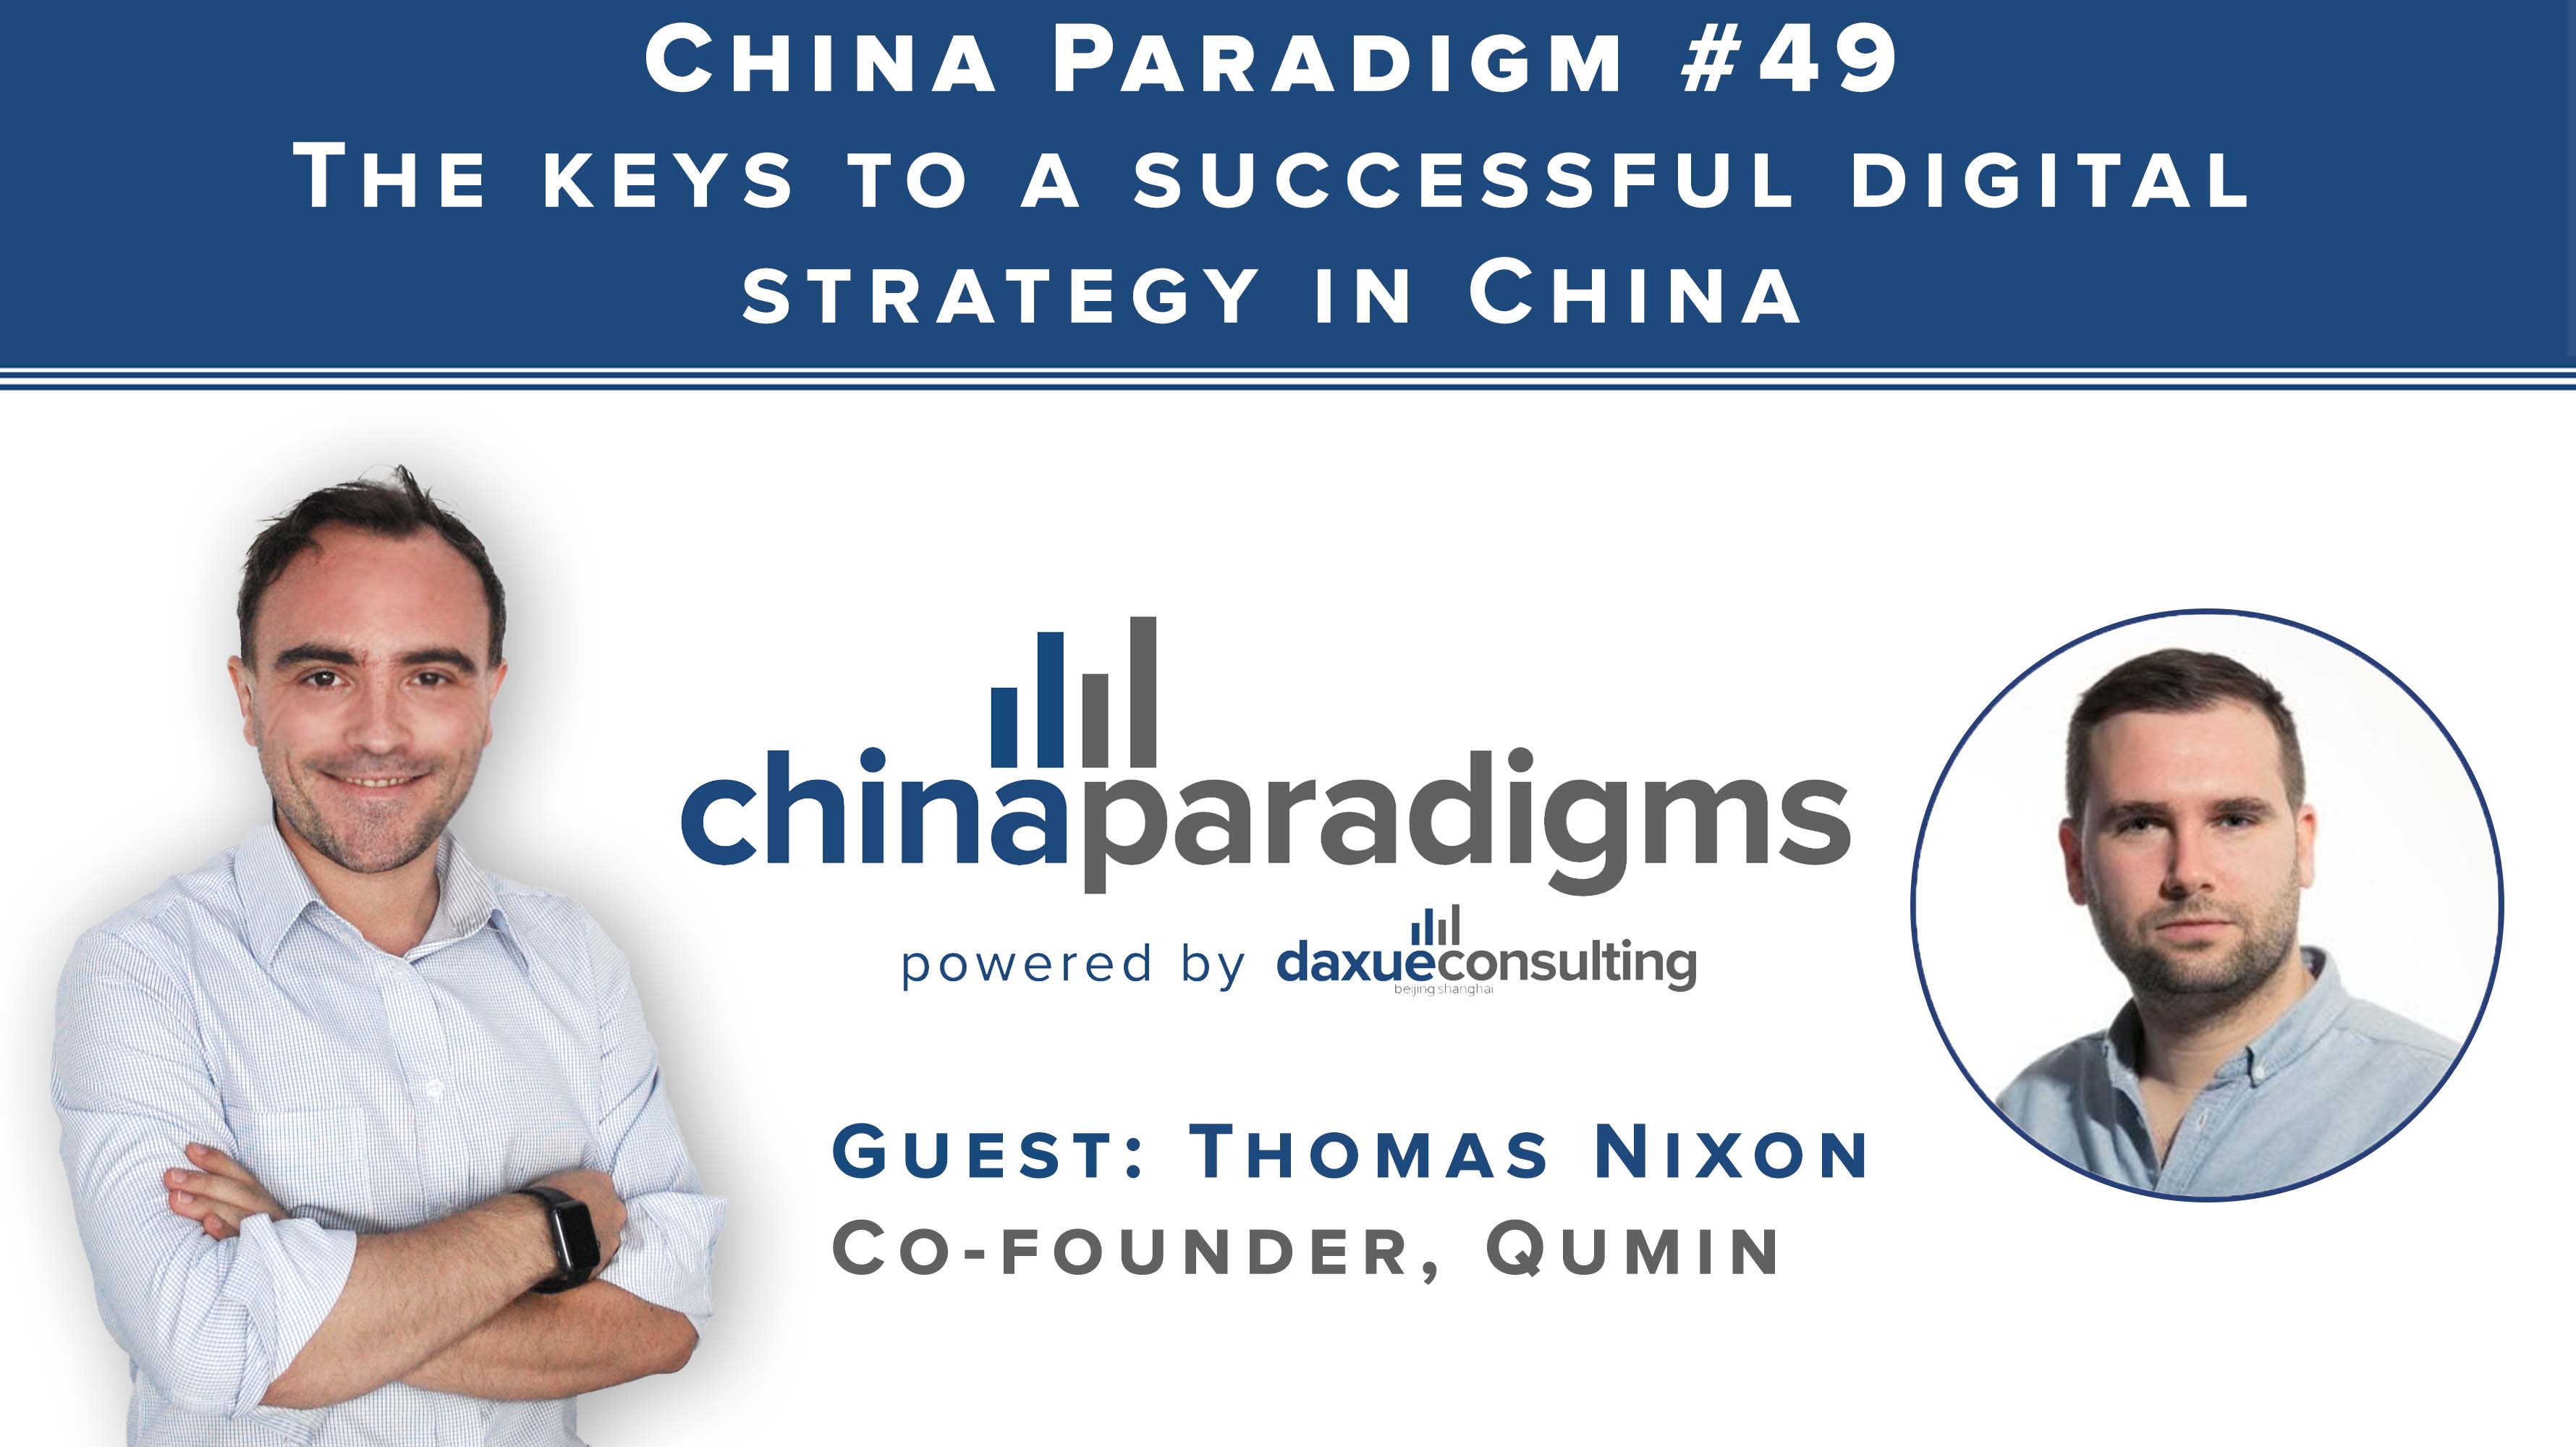 [Podcast] China Paradigm 49: The keys to a successful digital strategy in China